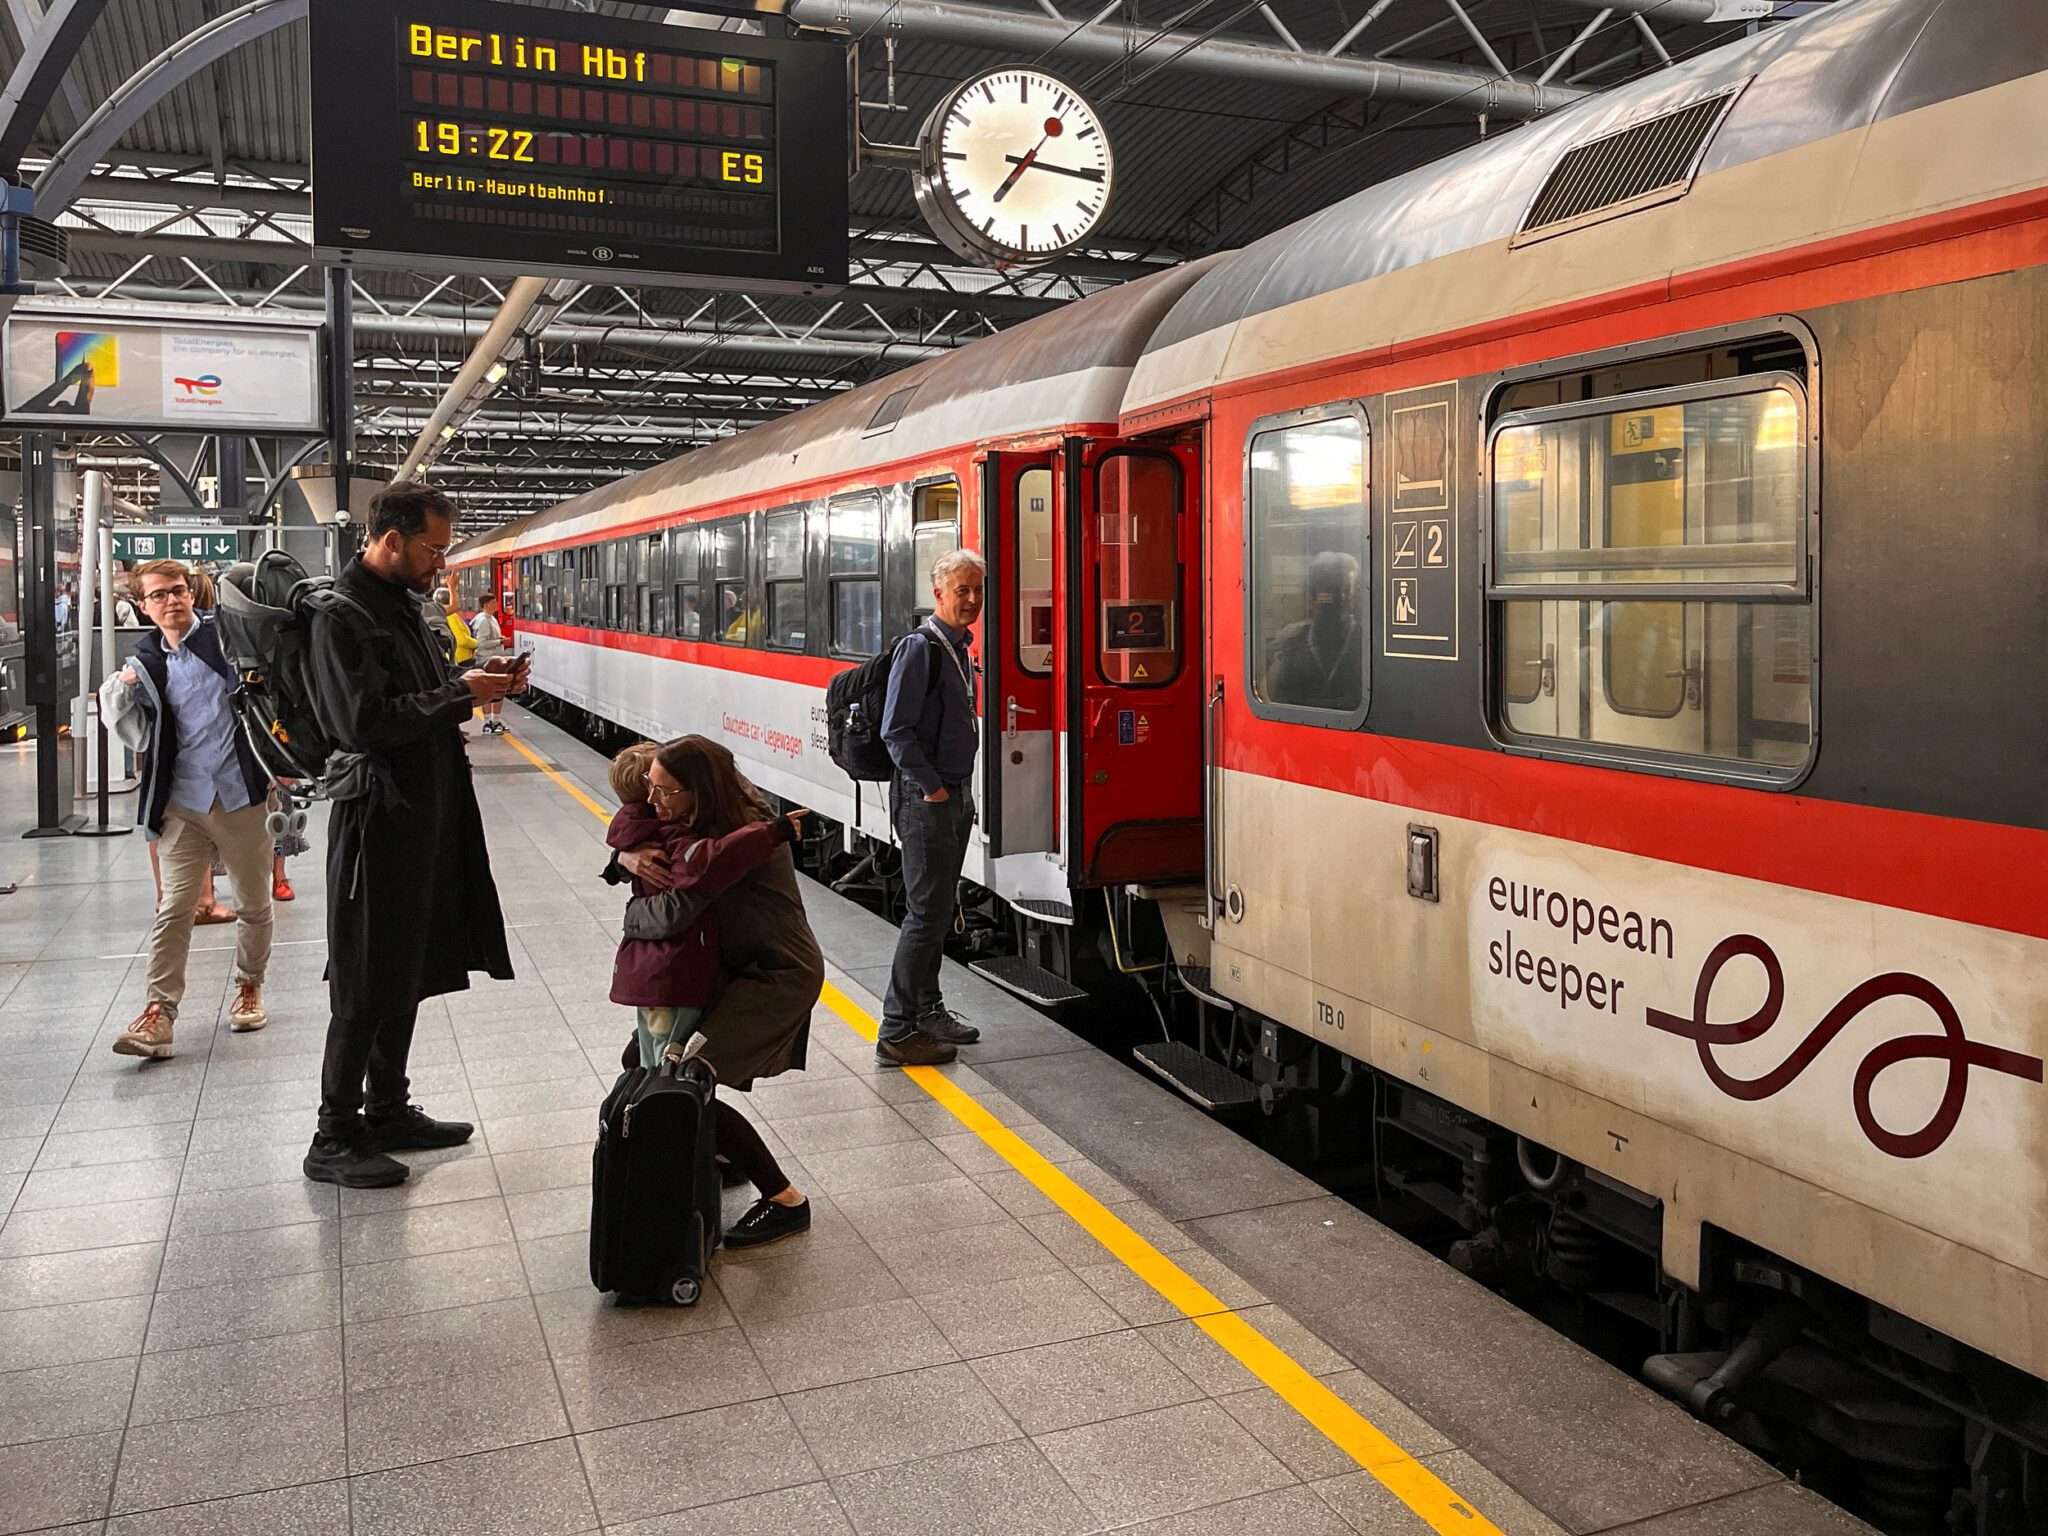 First night train connecting Brussels and Berlin starts operations. 